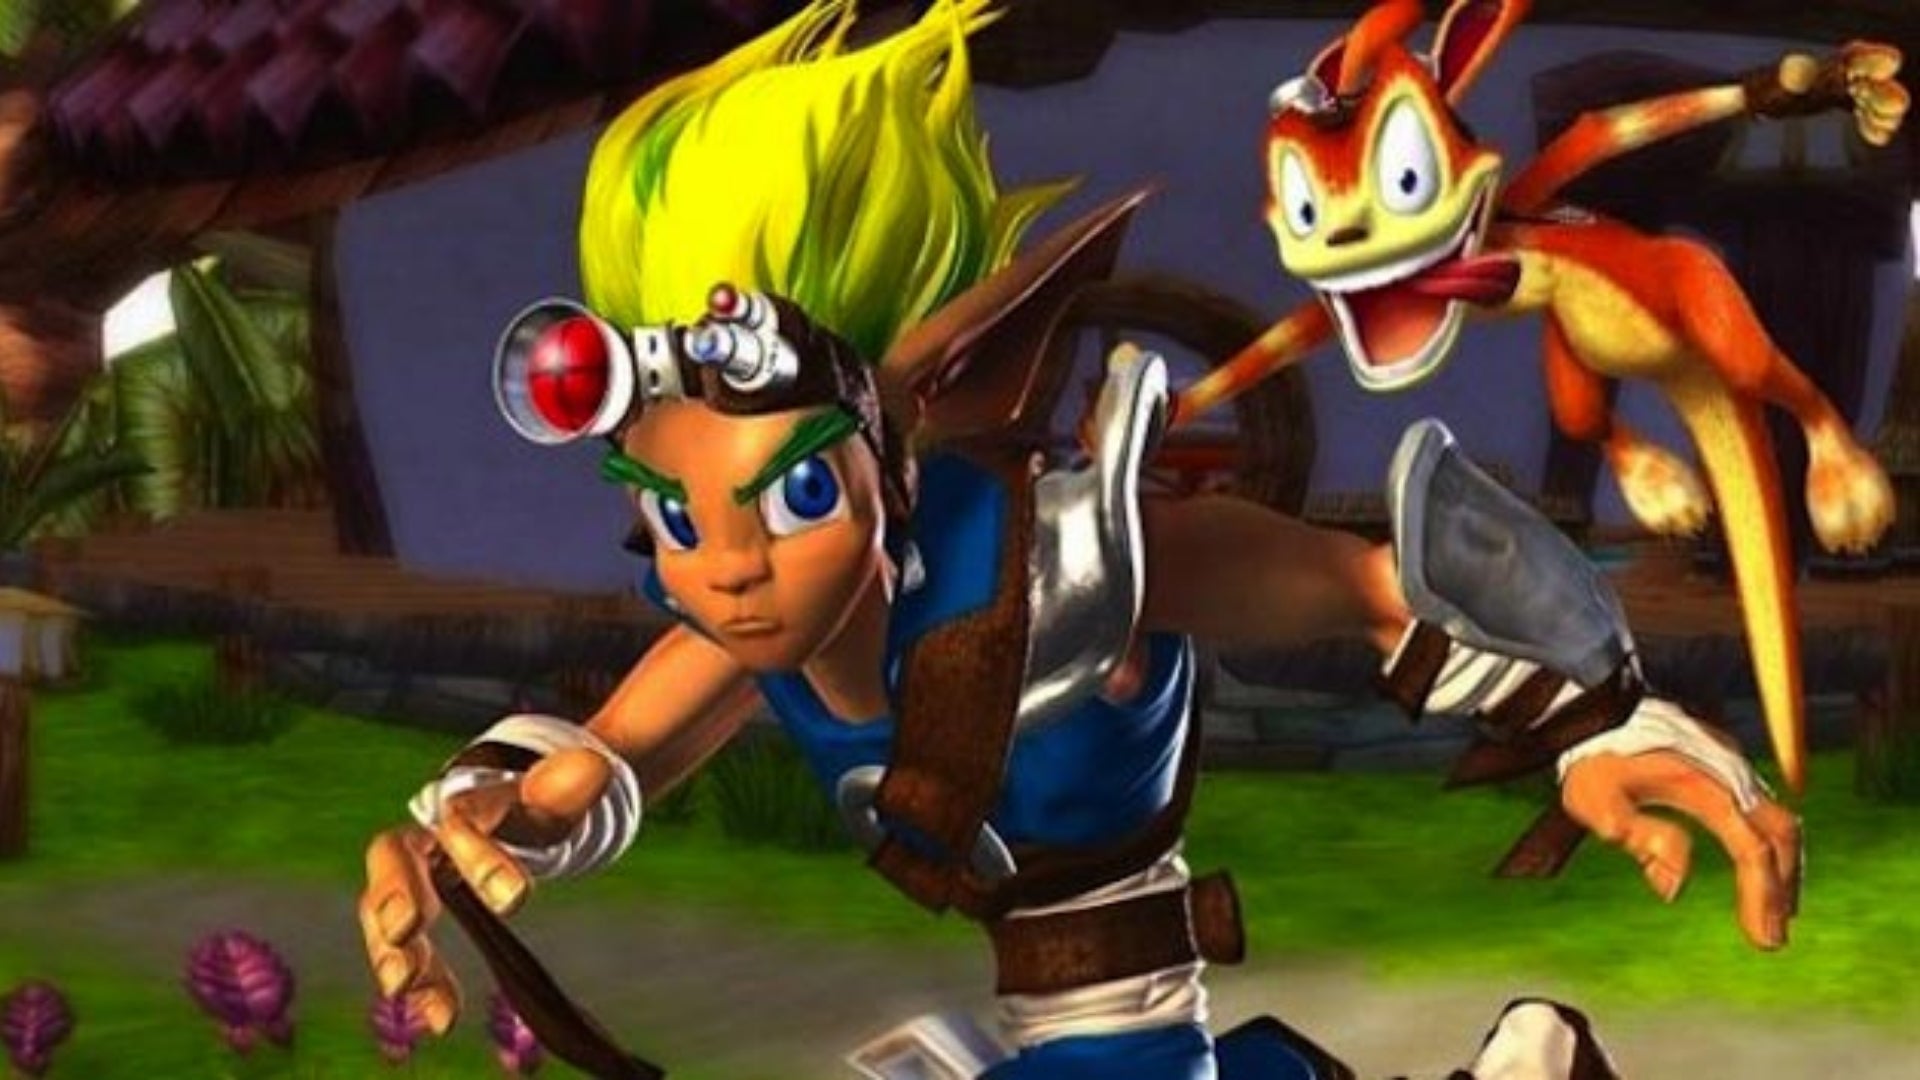 Jak and Daxter artwork for Jak and Daxter The Precursor Legacy